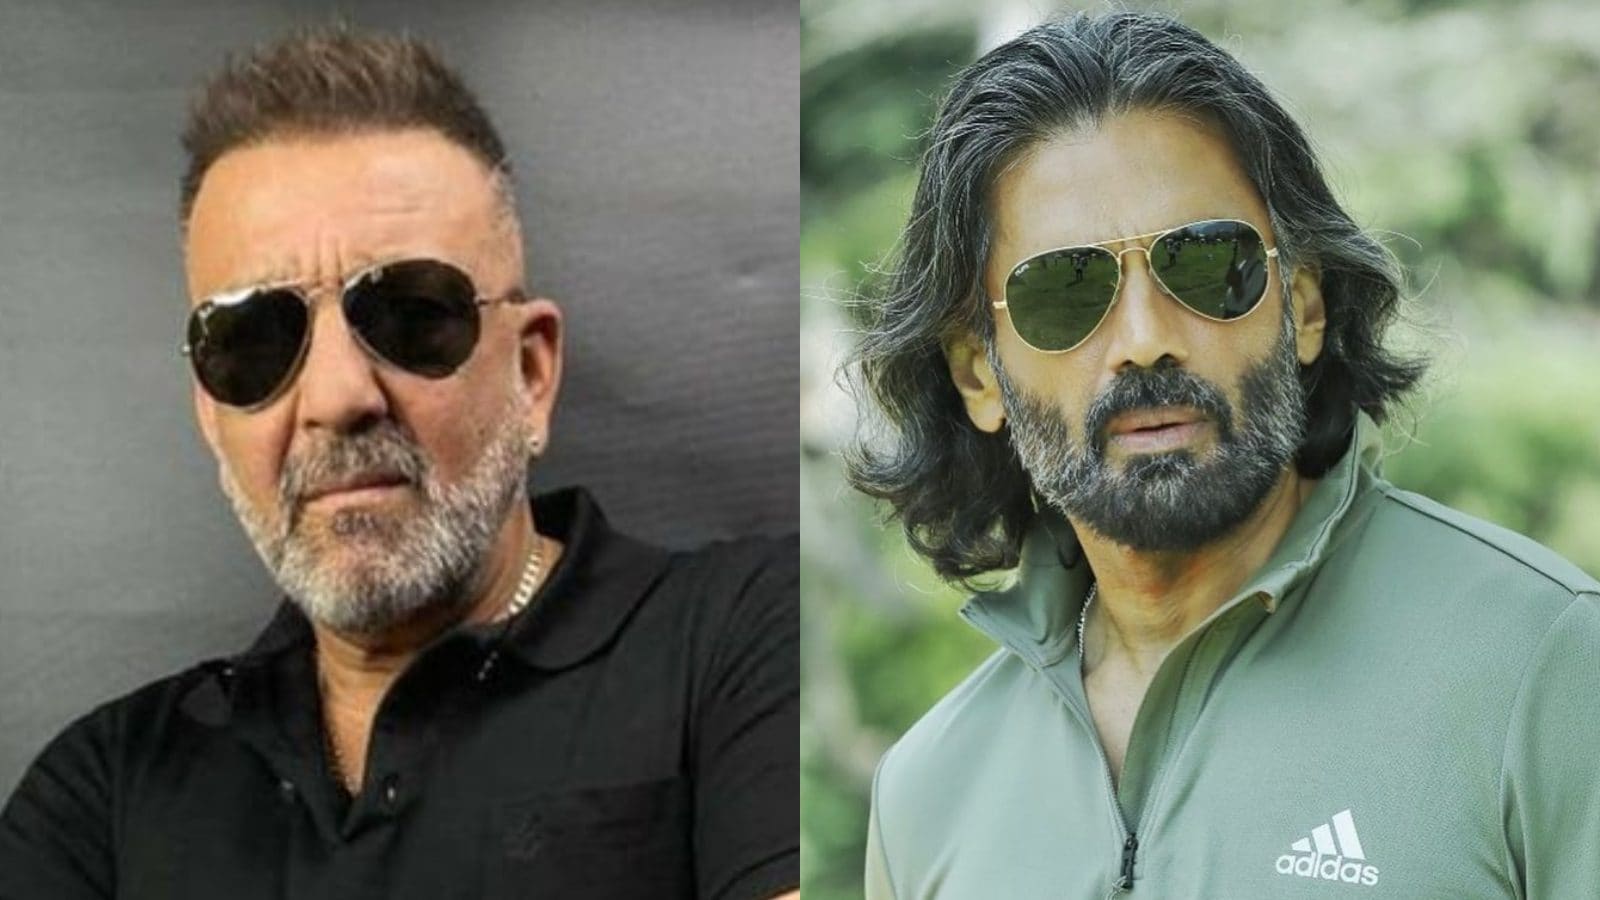 Sanjay Dutt And Suniel Shetty To Reunite For A Comedy Film After 12 Years?  Here's Everything We Know